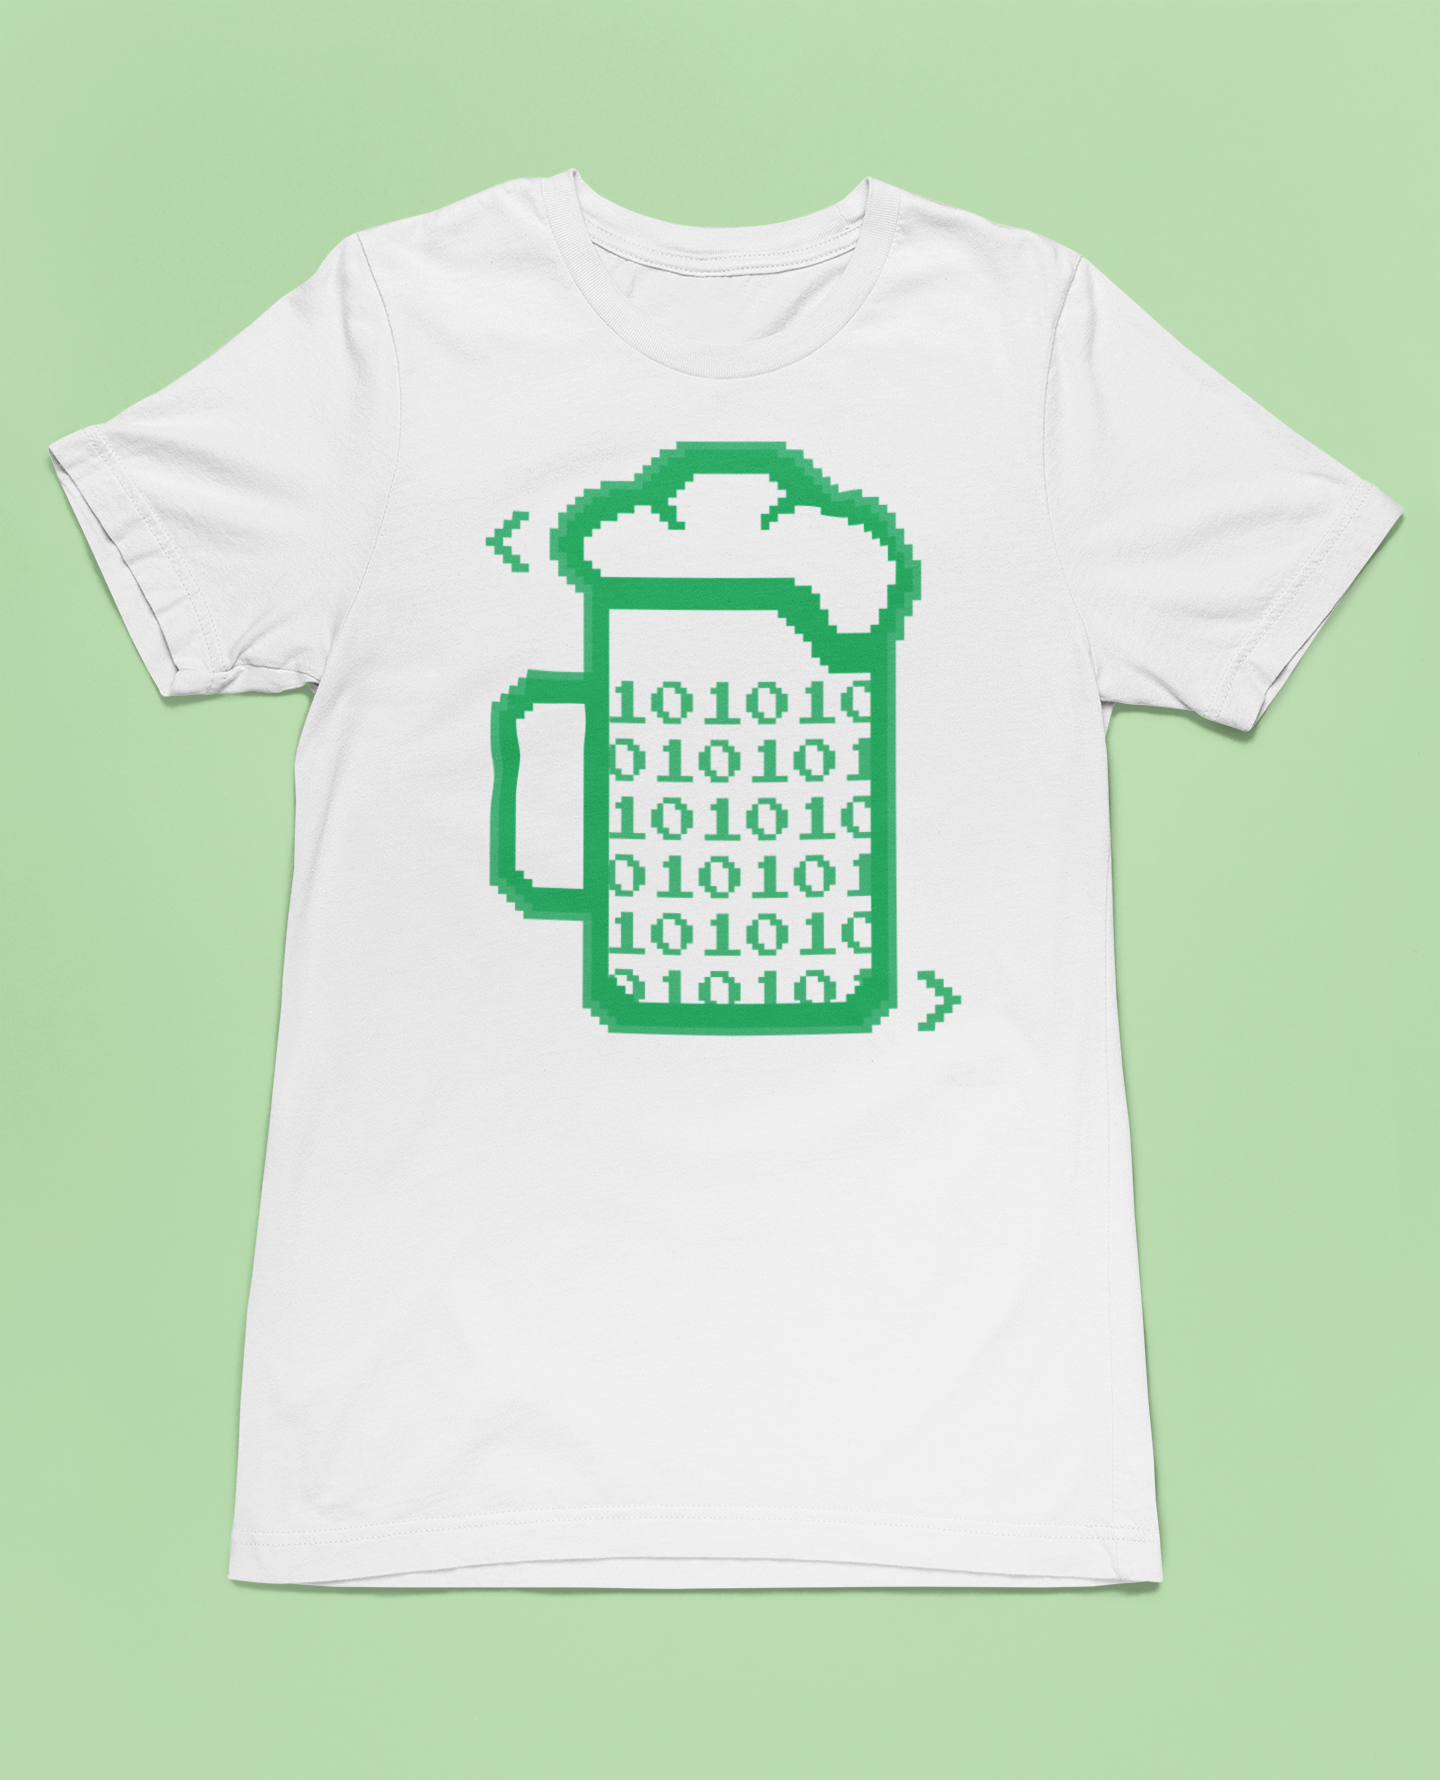 This is How I Love to Code T-Shirt made from premium cotton featuring a pixelated design of a mug filled with binary code symbolizing coding skills on a green background, designed for long-lasting wear.